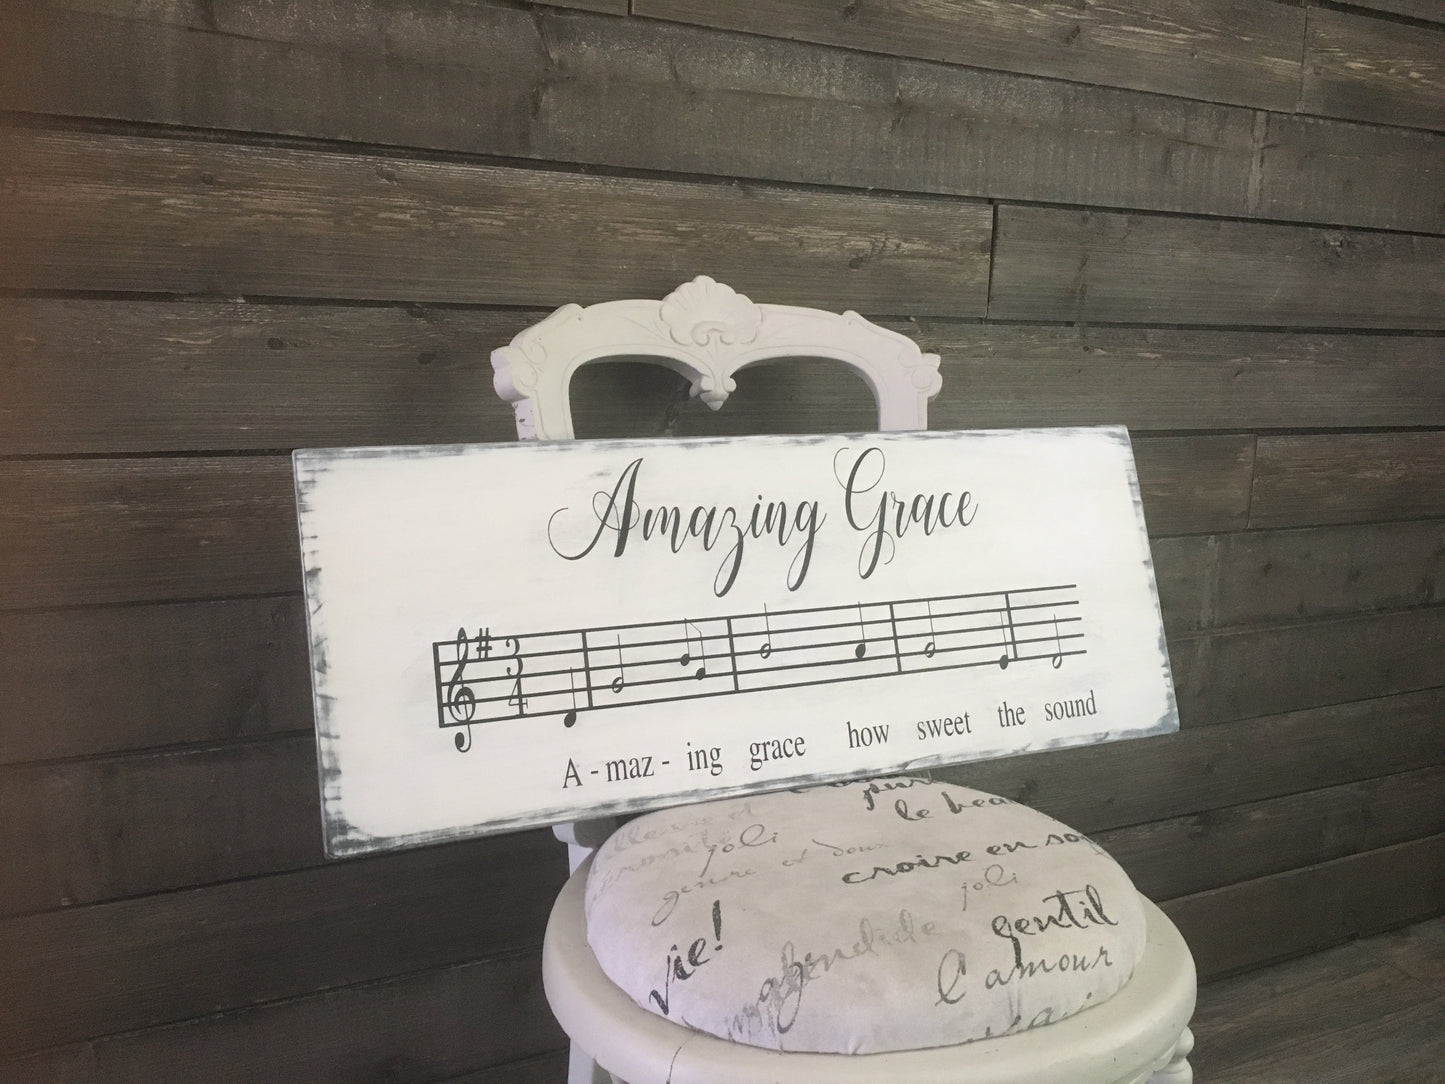 Amazing Grace Sheet Music Hand Painted Farmhouse Style Sign